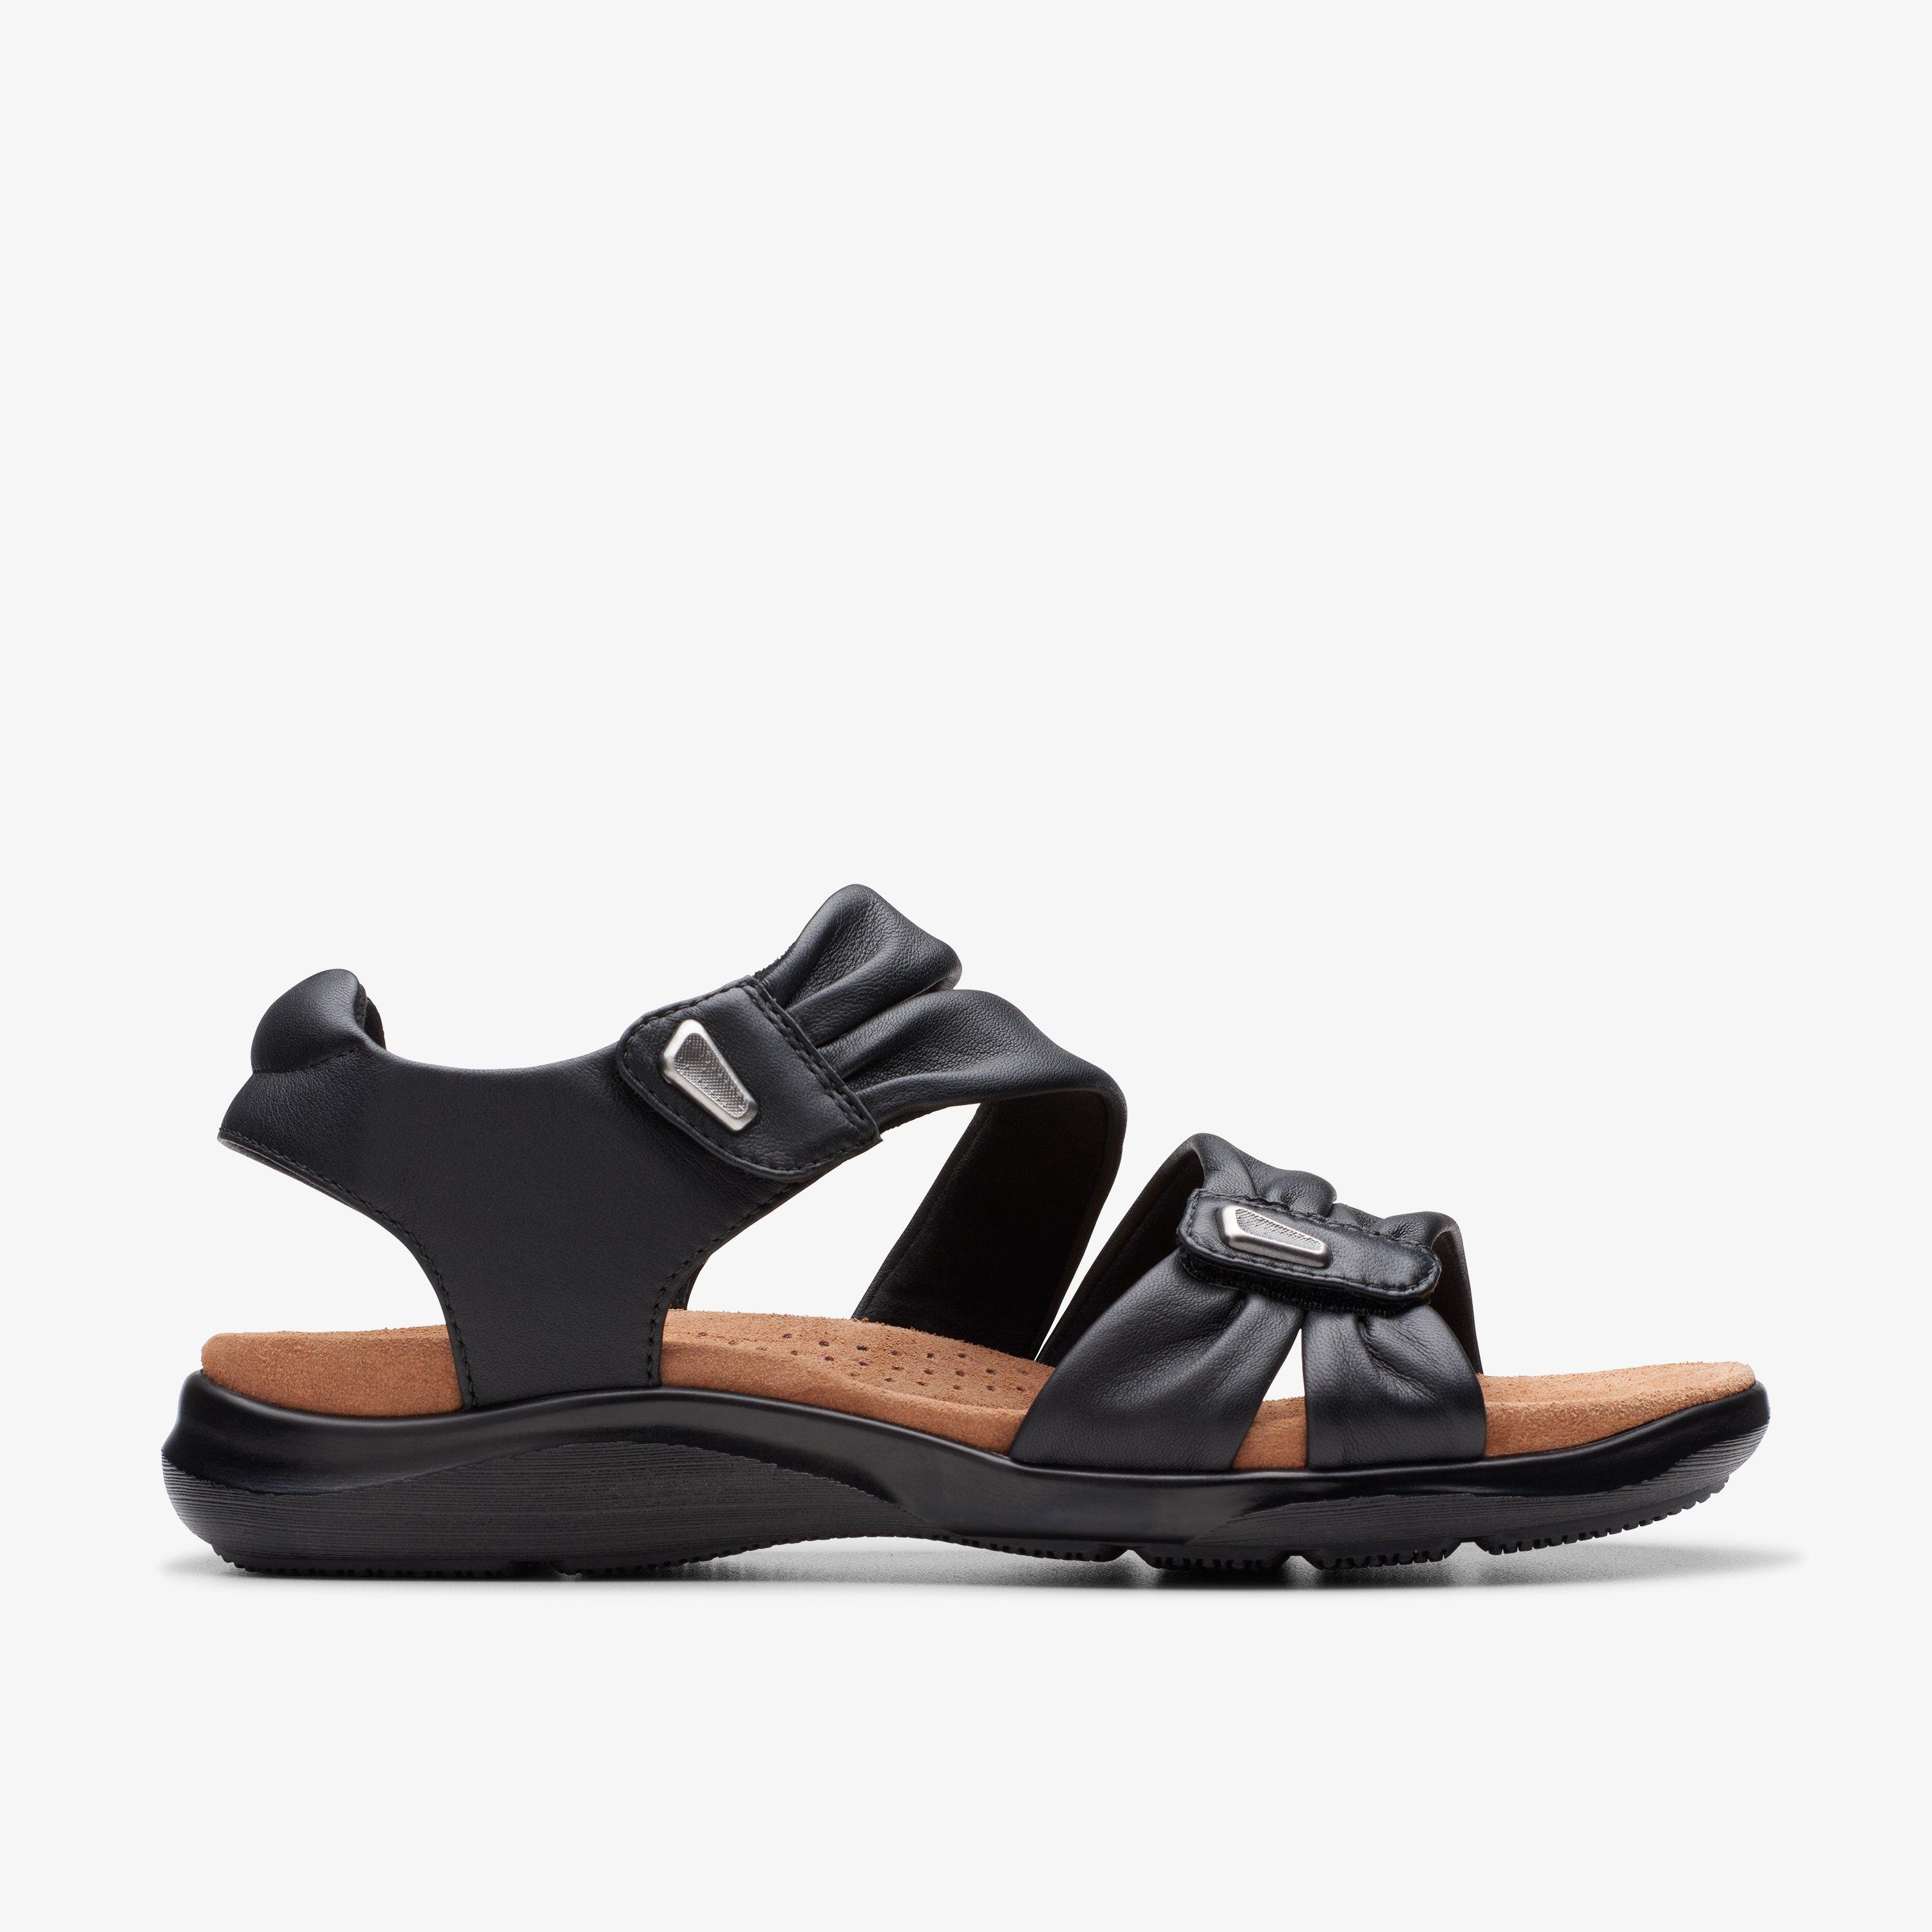 WOMENS Kitly Ave Black Leather Flat Sandals | Clarks US